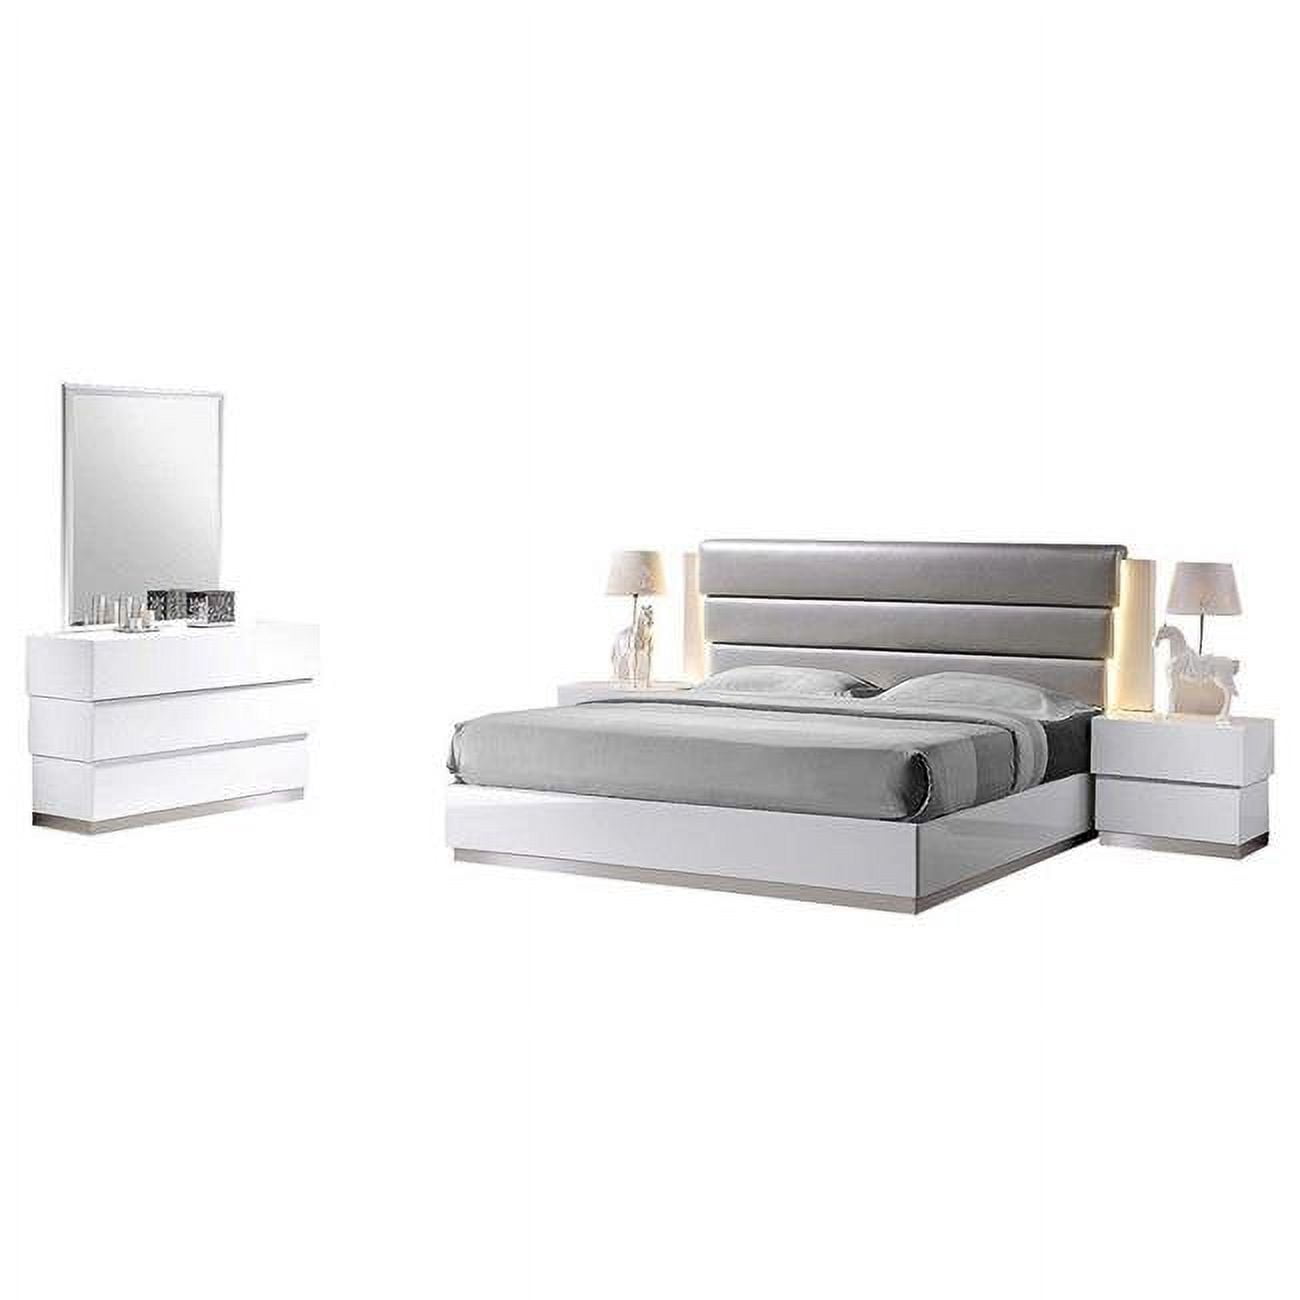 Florence Eastern King 5 Pcs Florence White Lacquer & Gray Leather Headboard King Bed Set